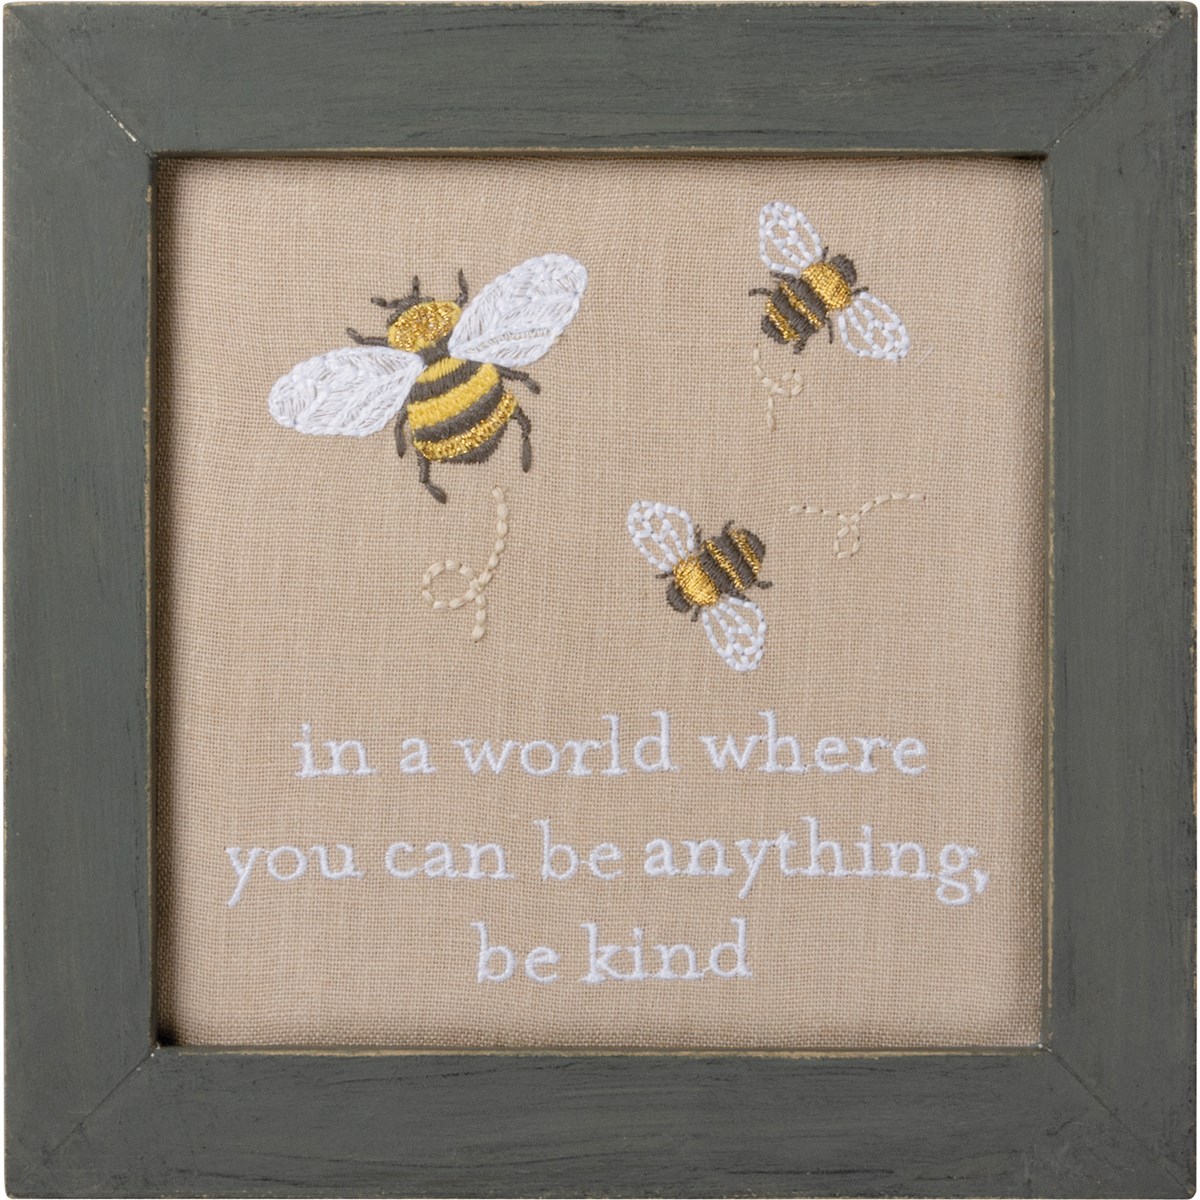 In A World Where Be Kind Stitchery - Cotton, Linen, Wood